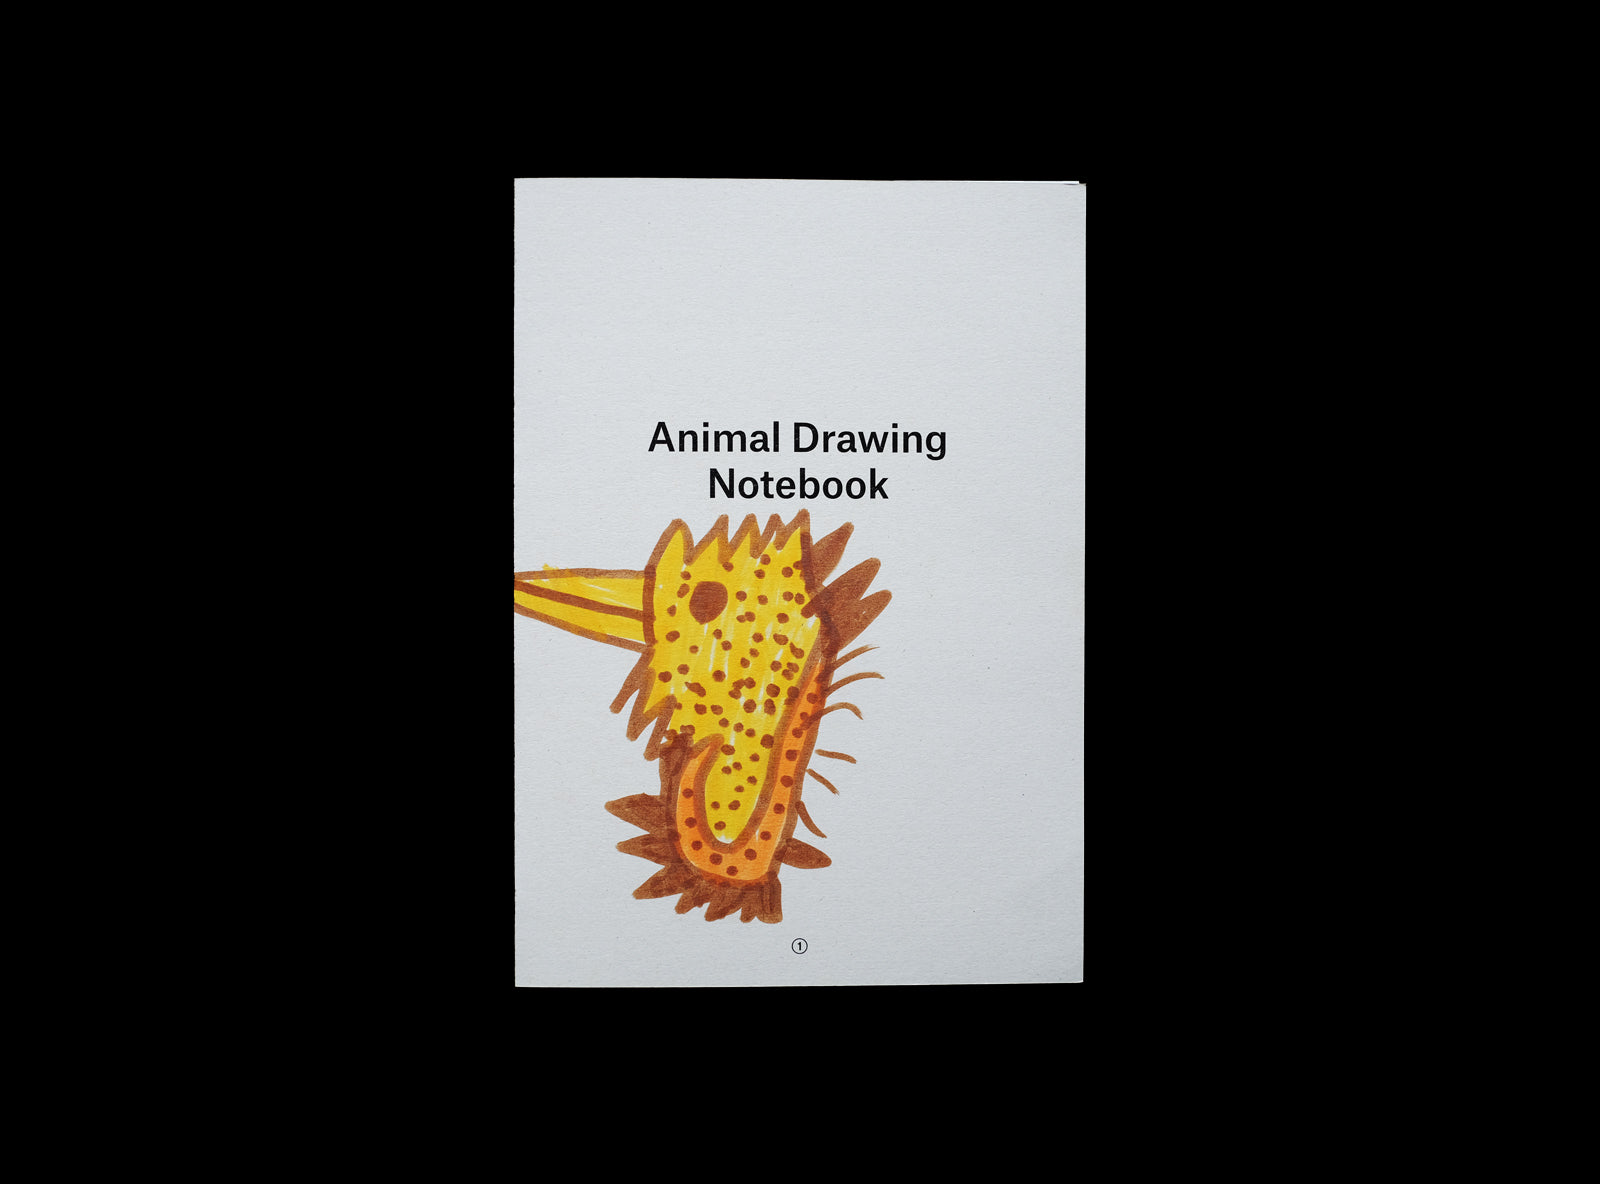 Cover of animal drawing notebook with a kid's drawing:bird